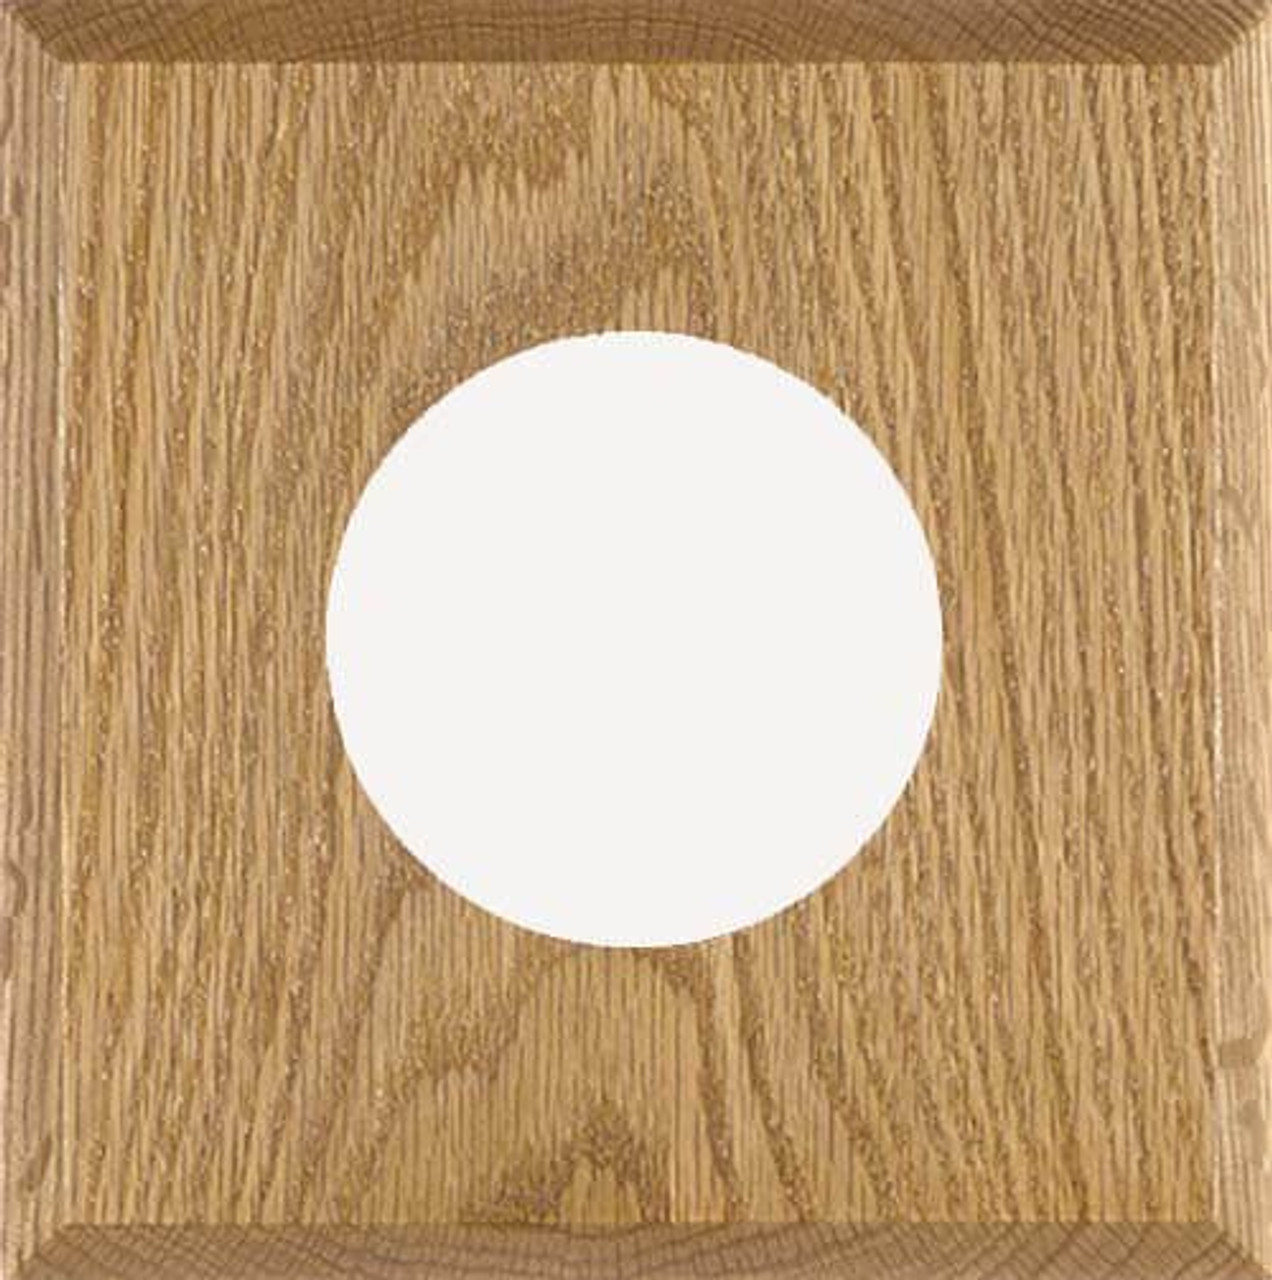 Oak Panel Mount for Mystic Digital Thermometer and Barometer Instrument